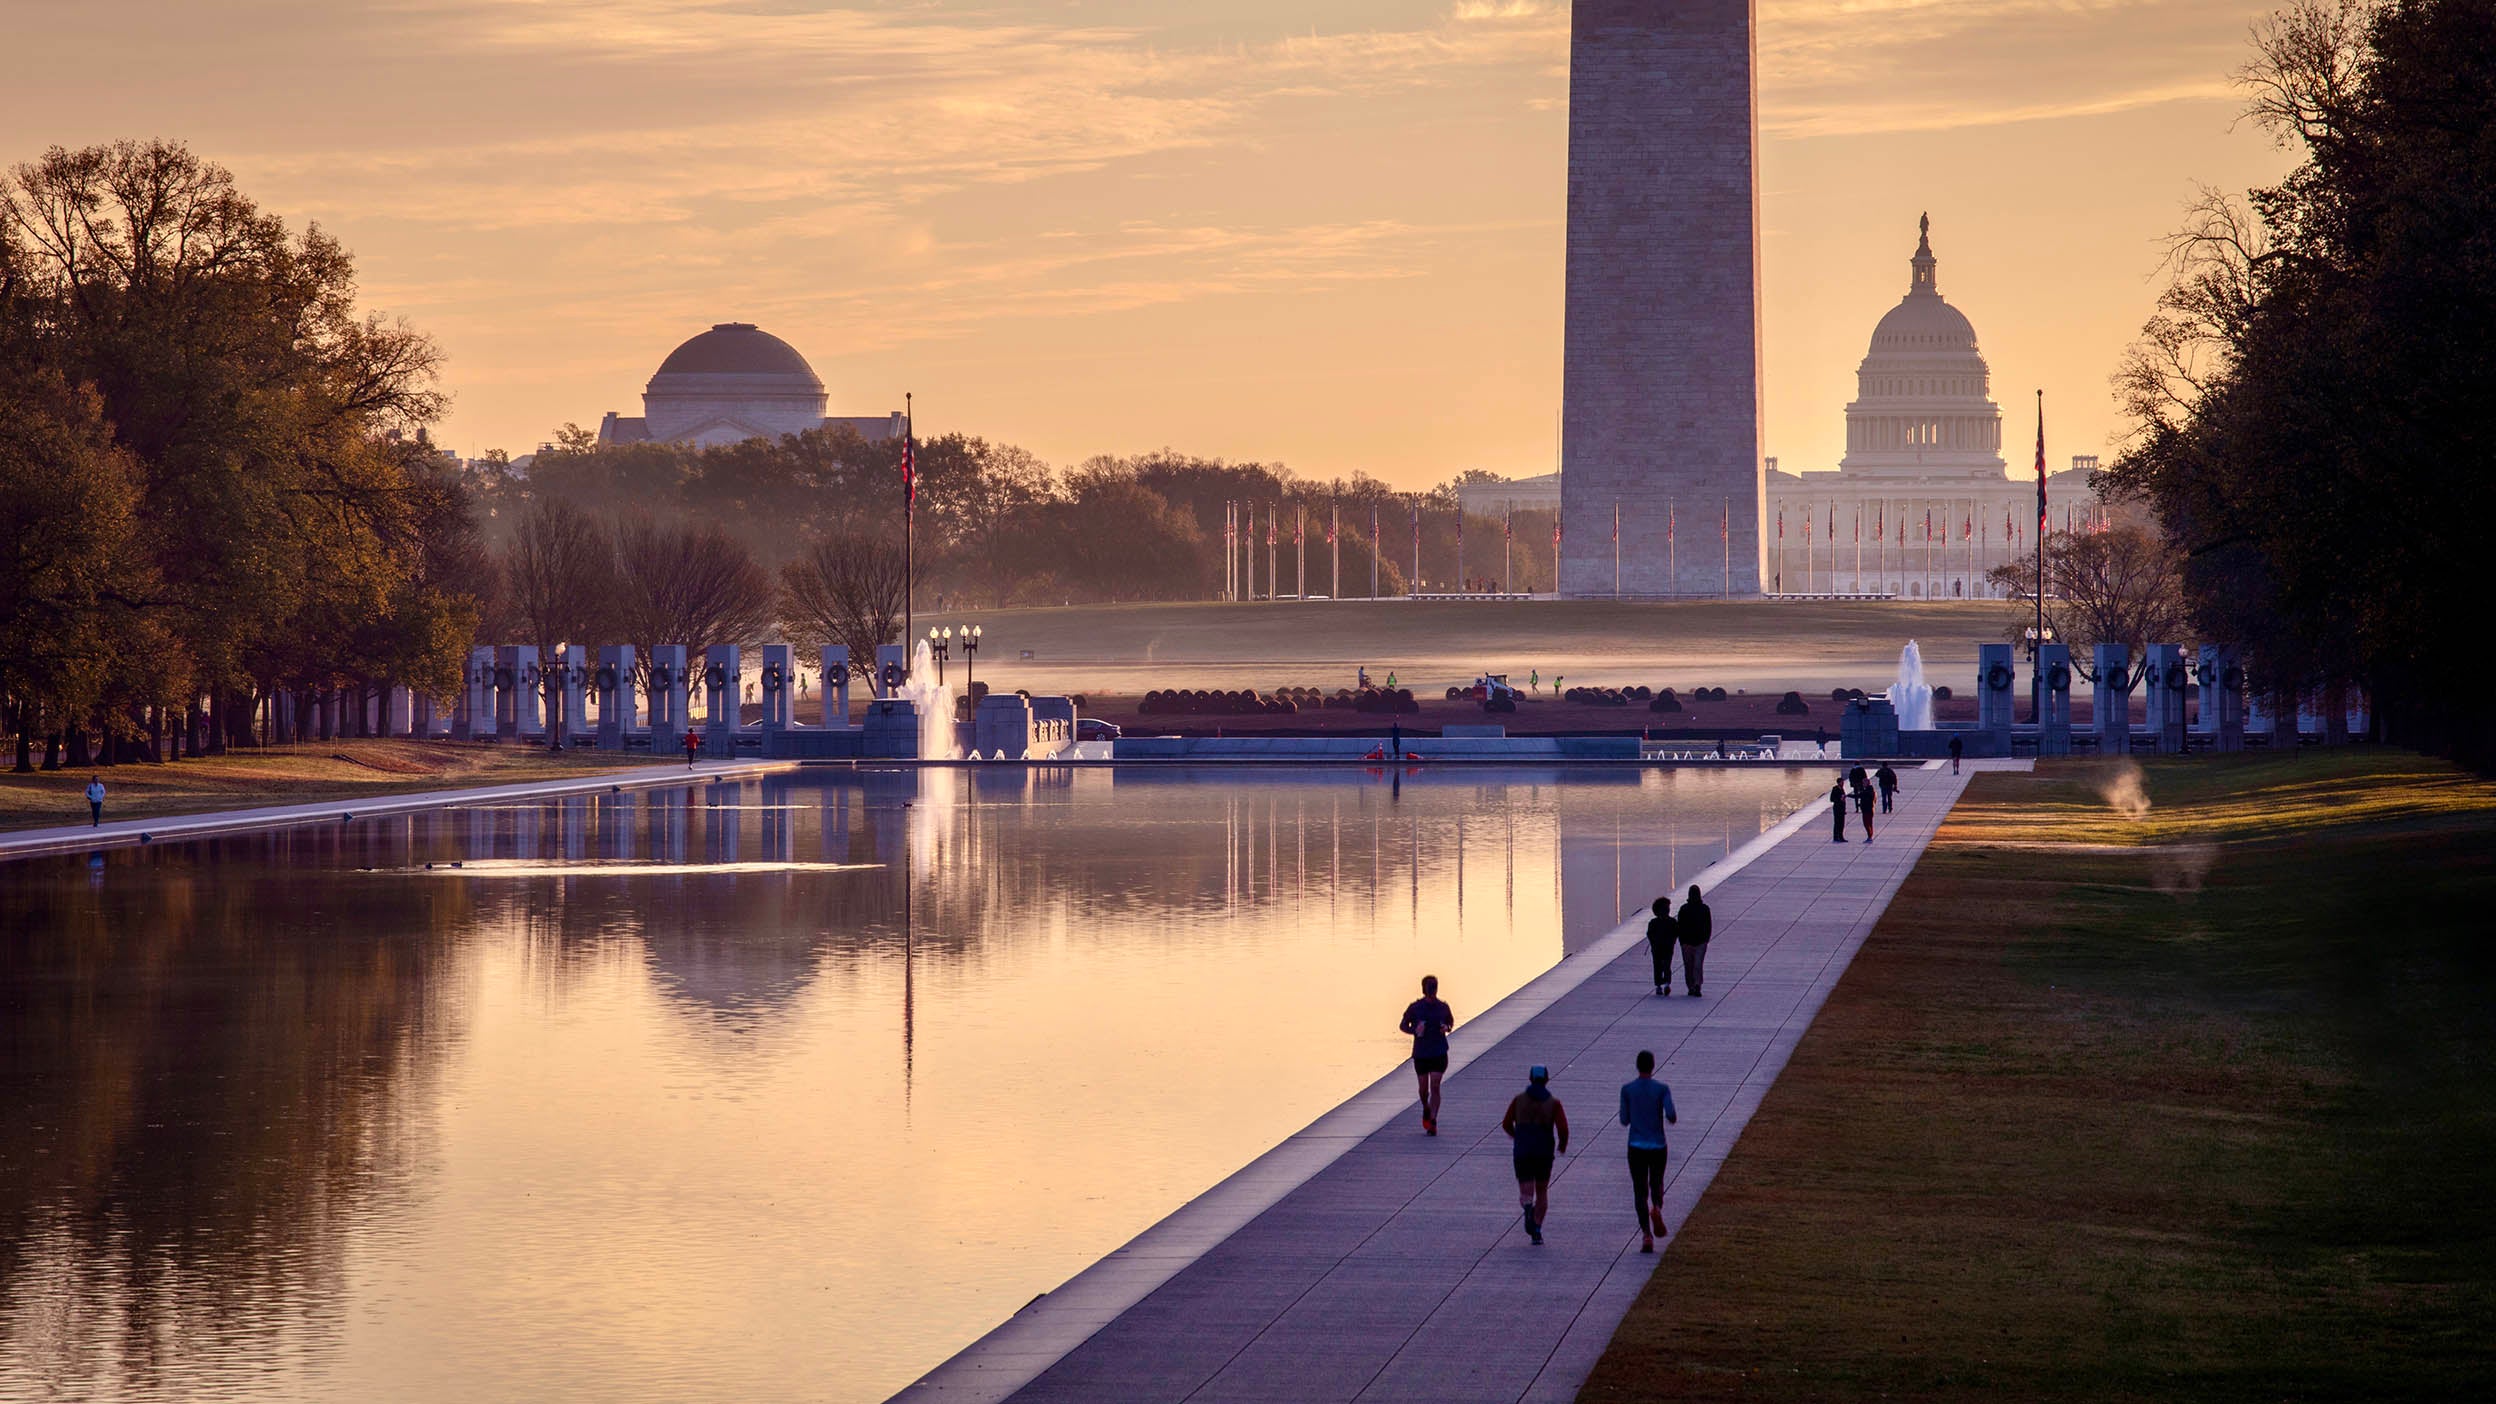 Vibrant sunrise over the National Mall in Washington DC with the Capitol building in the background